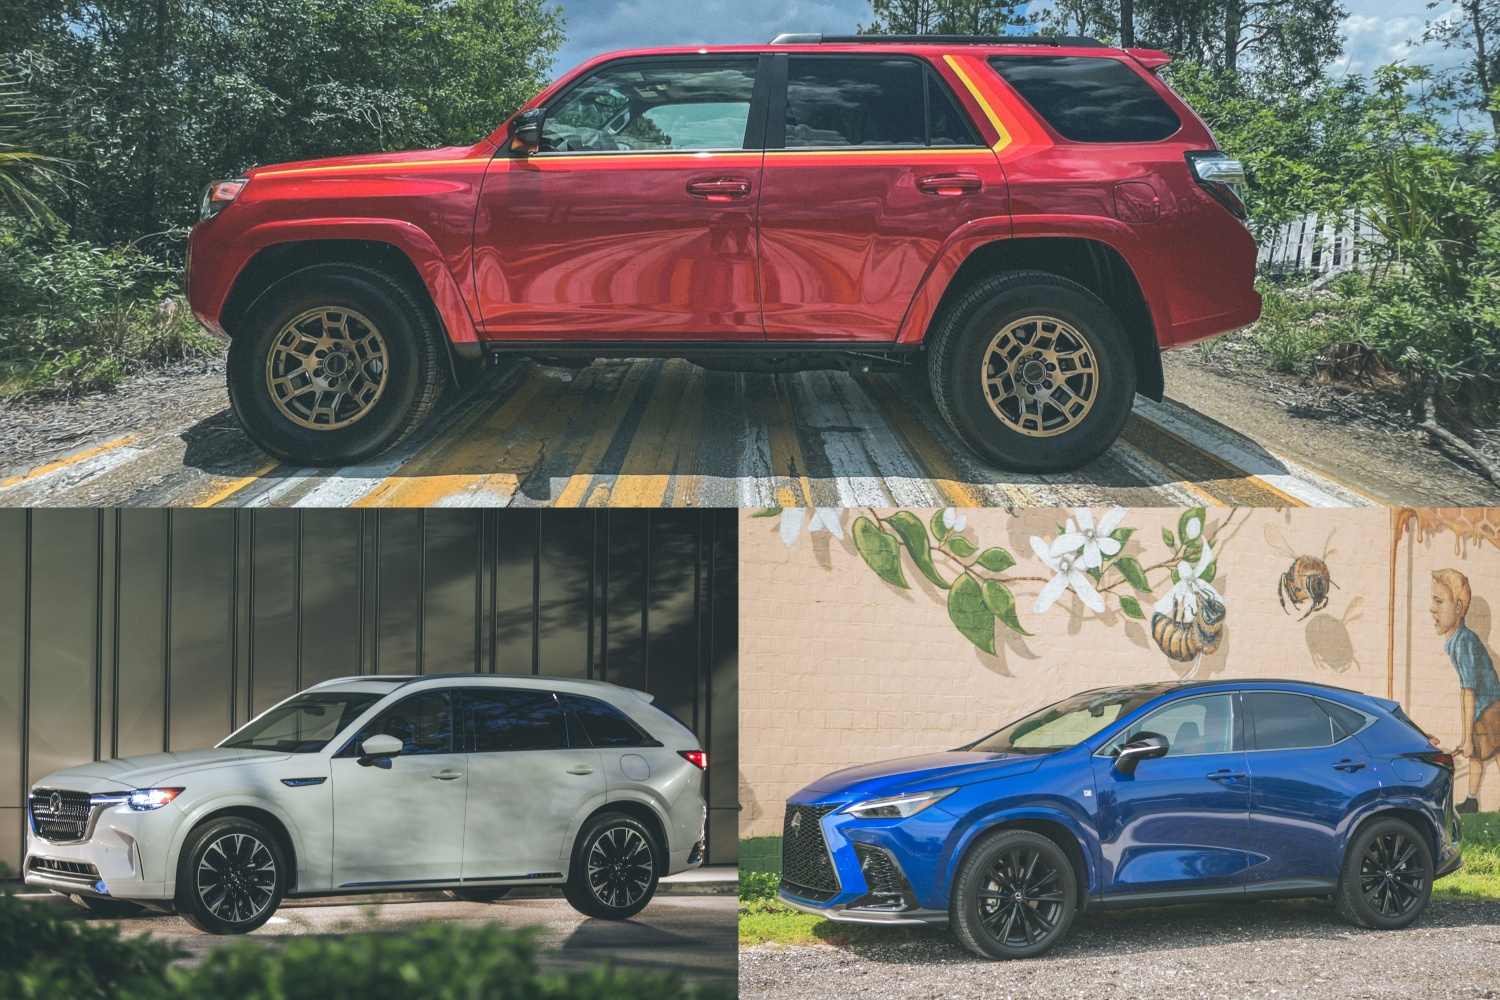 The sportiest SUVs of 2023 from Toyota, Mazda, and Lexus